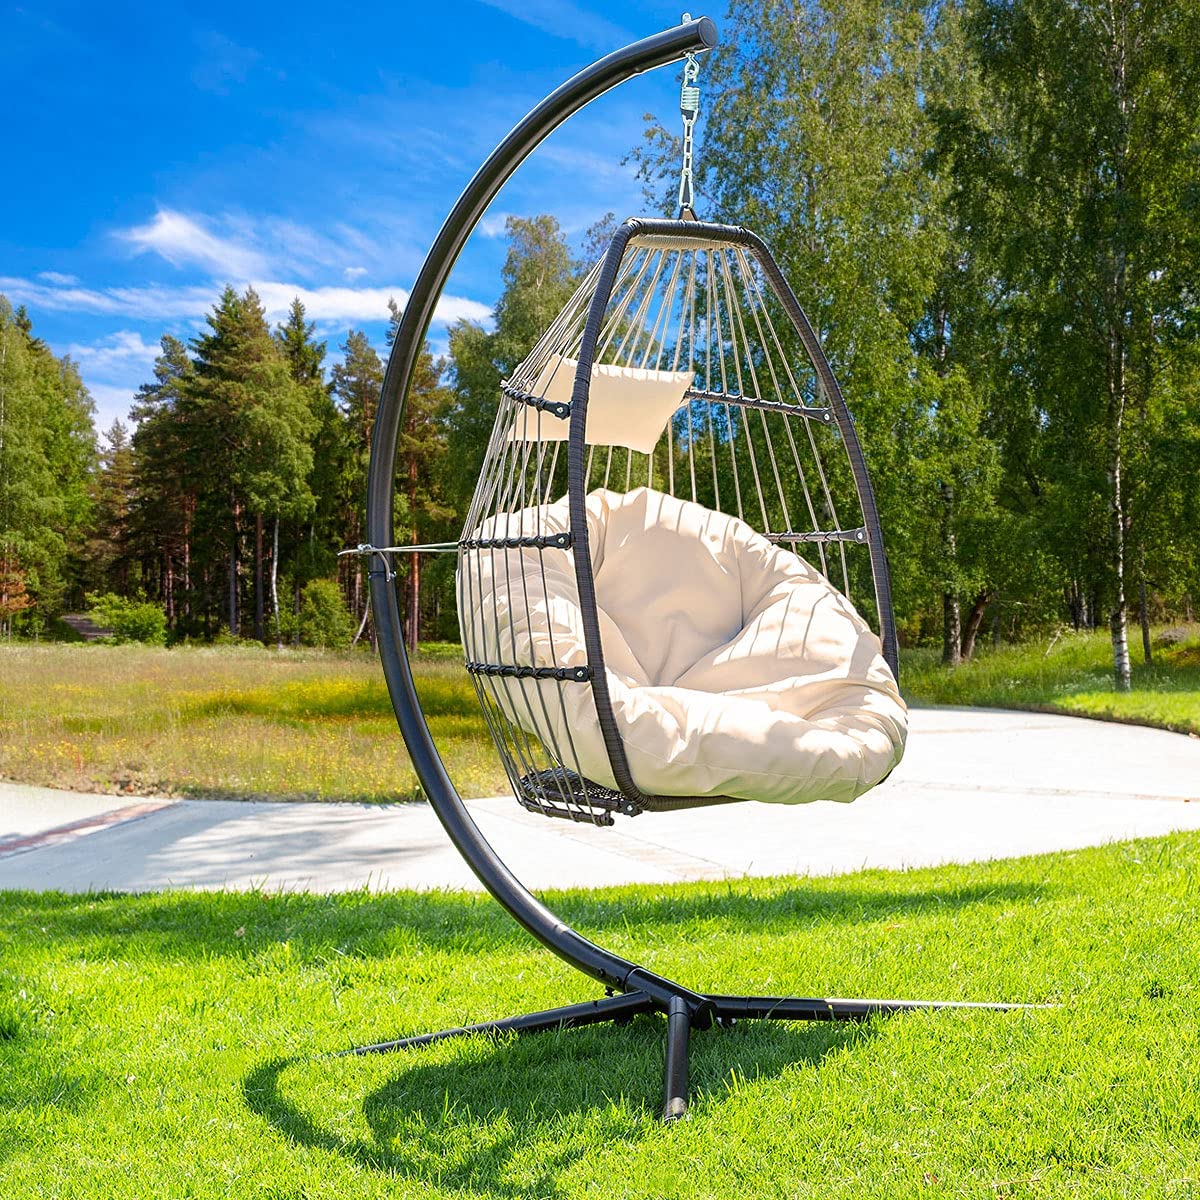 Best outdoor furniture for Airbnb